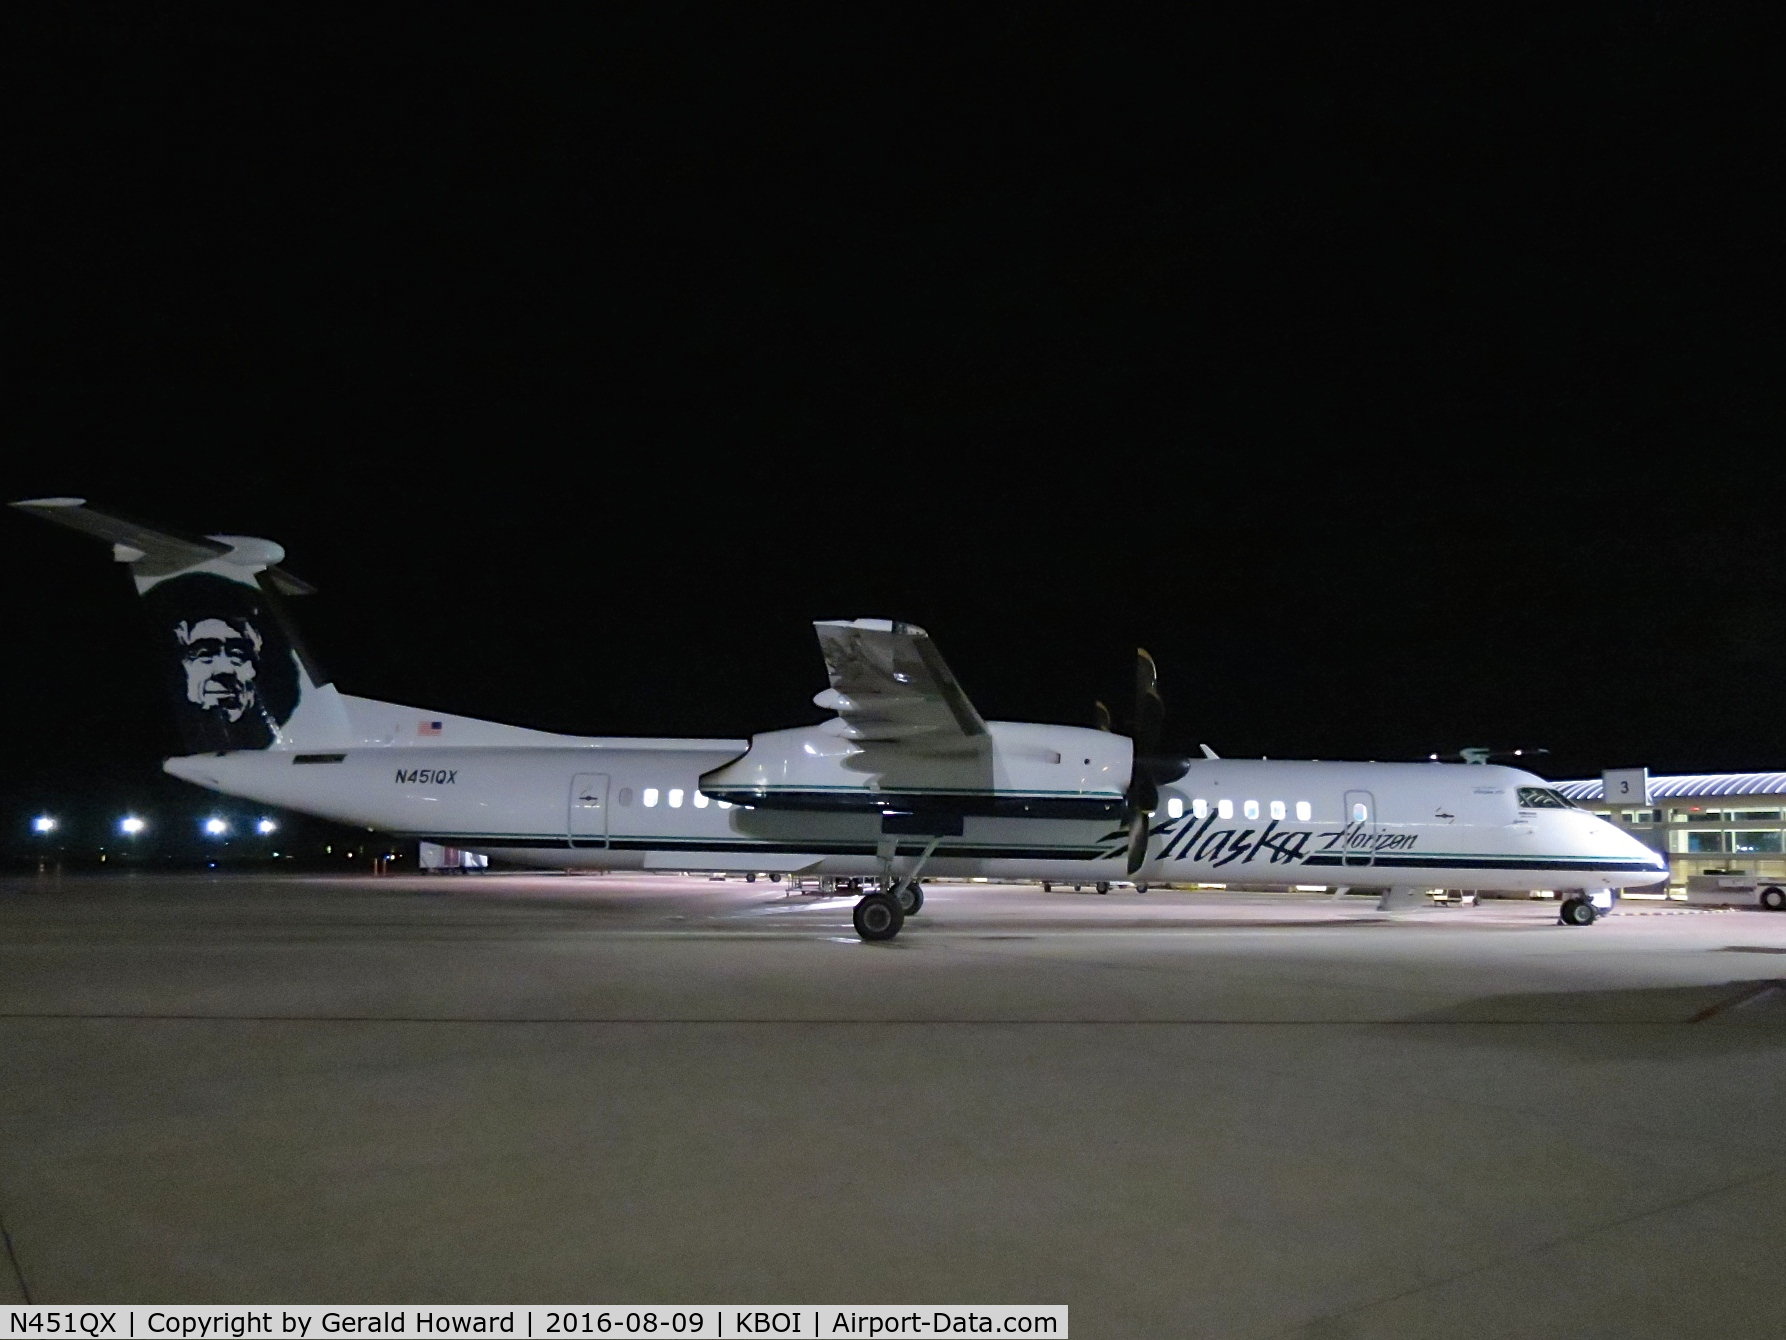 N451QX, 2013 Bombardier DHC-8-402 Dash 8 C/N 4457, Parked on Alaska ramp before the sun rise.